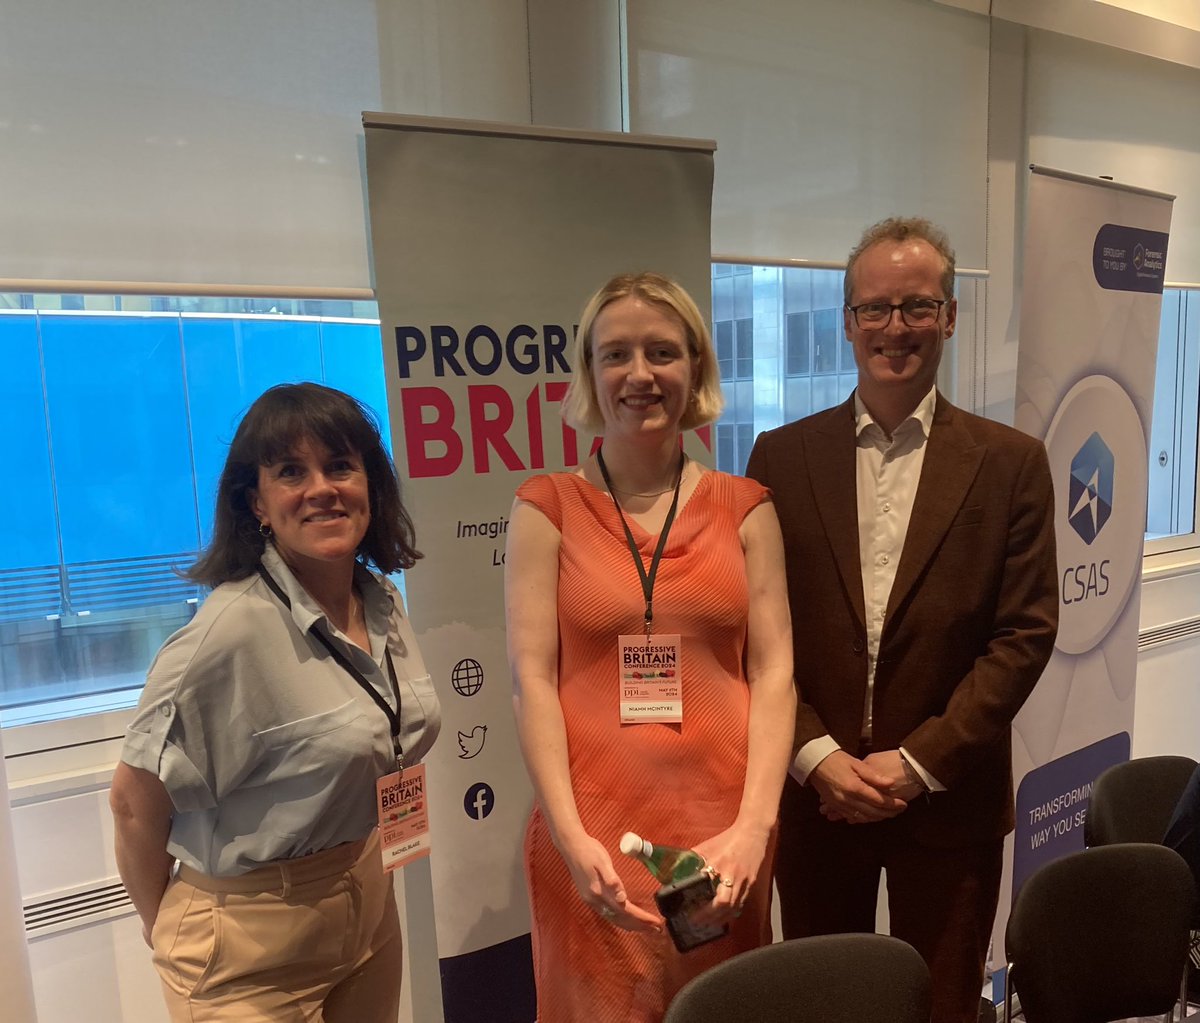 Good to join @Tijs_Broeke @niamh_mcintyre today @progbrit to discuss fraud, economic crime, its impact on communities and how we must stop dirty money from damaging London and the UK.